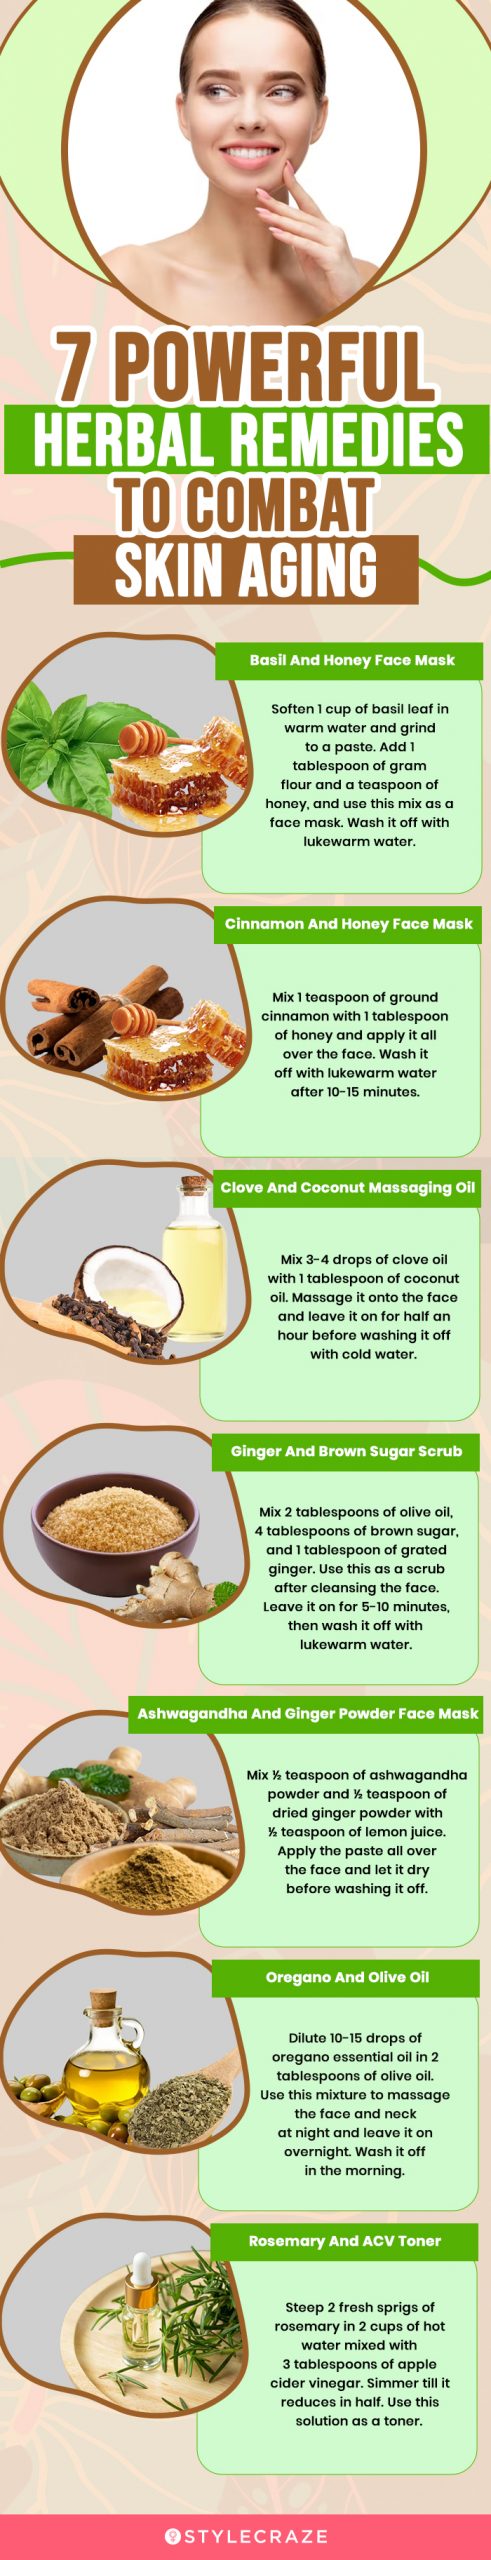 7 powerful herbal remedies to combat skin aging (infographic)